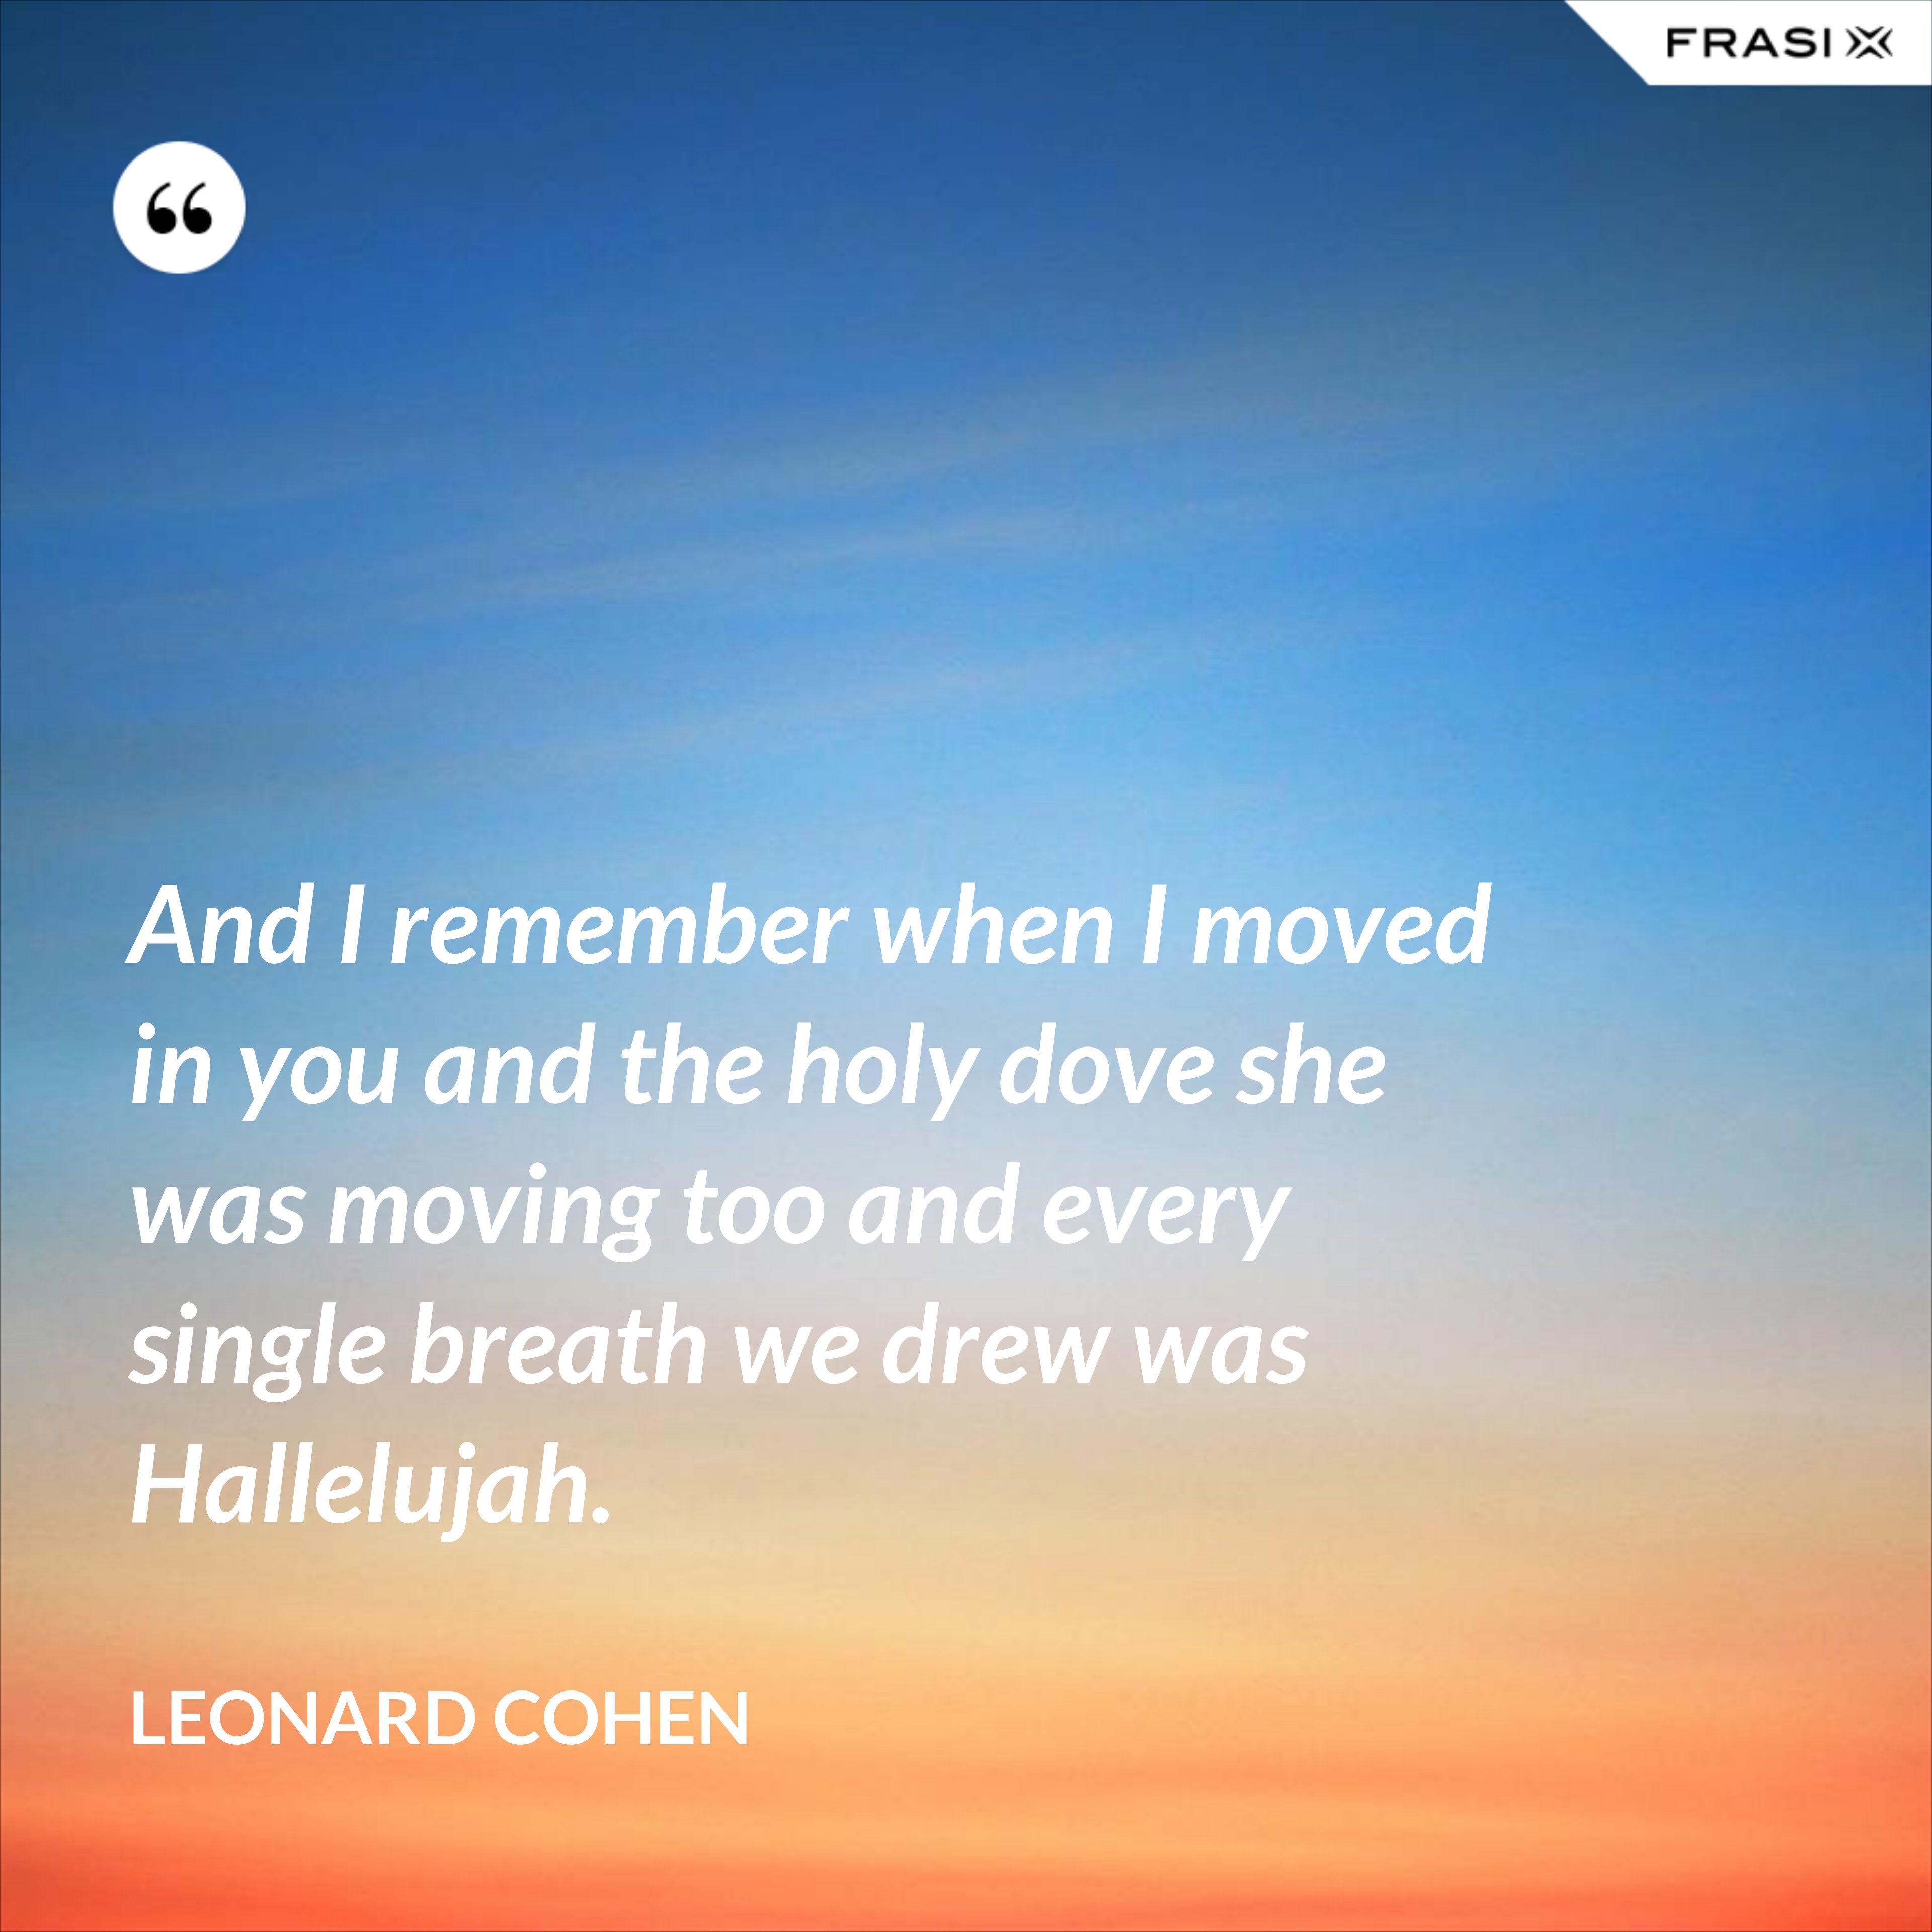 And I remember when I moved in you and the holy dove she was moving too and every single breath we drew was Hallelujah. - Leonard Cohen